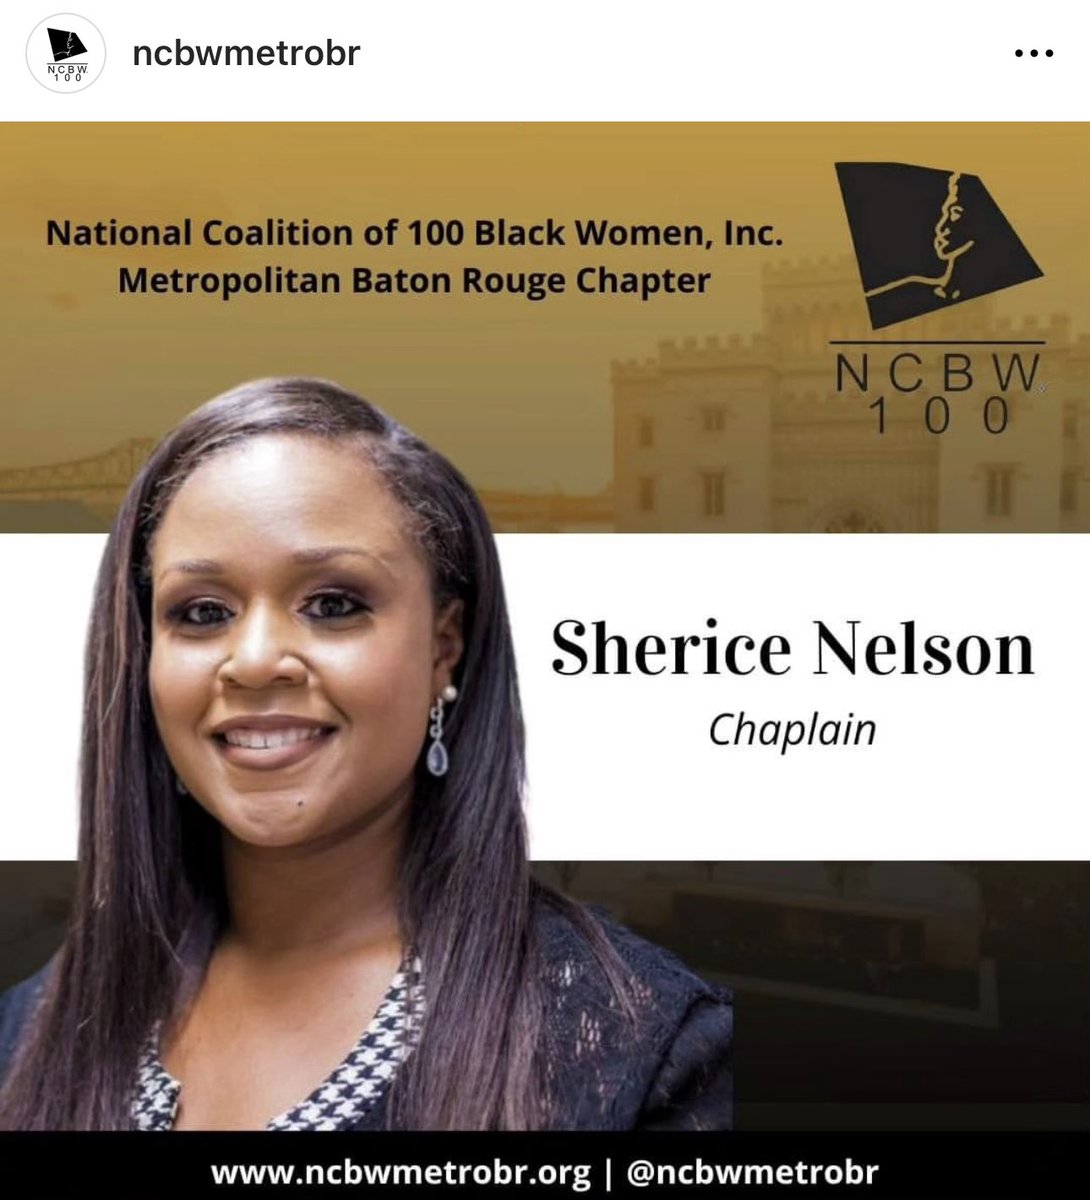 I’m happy to announce 📣 my Chaplincy with the National Coalition of 100 Black Women, Inc. - Metropolitan Baton Rouge Chapter. I will serve as a Chapter Officer for the Board of Directors from 2023-2025.